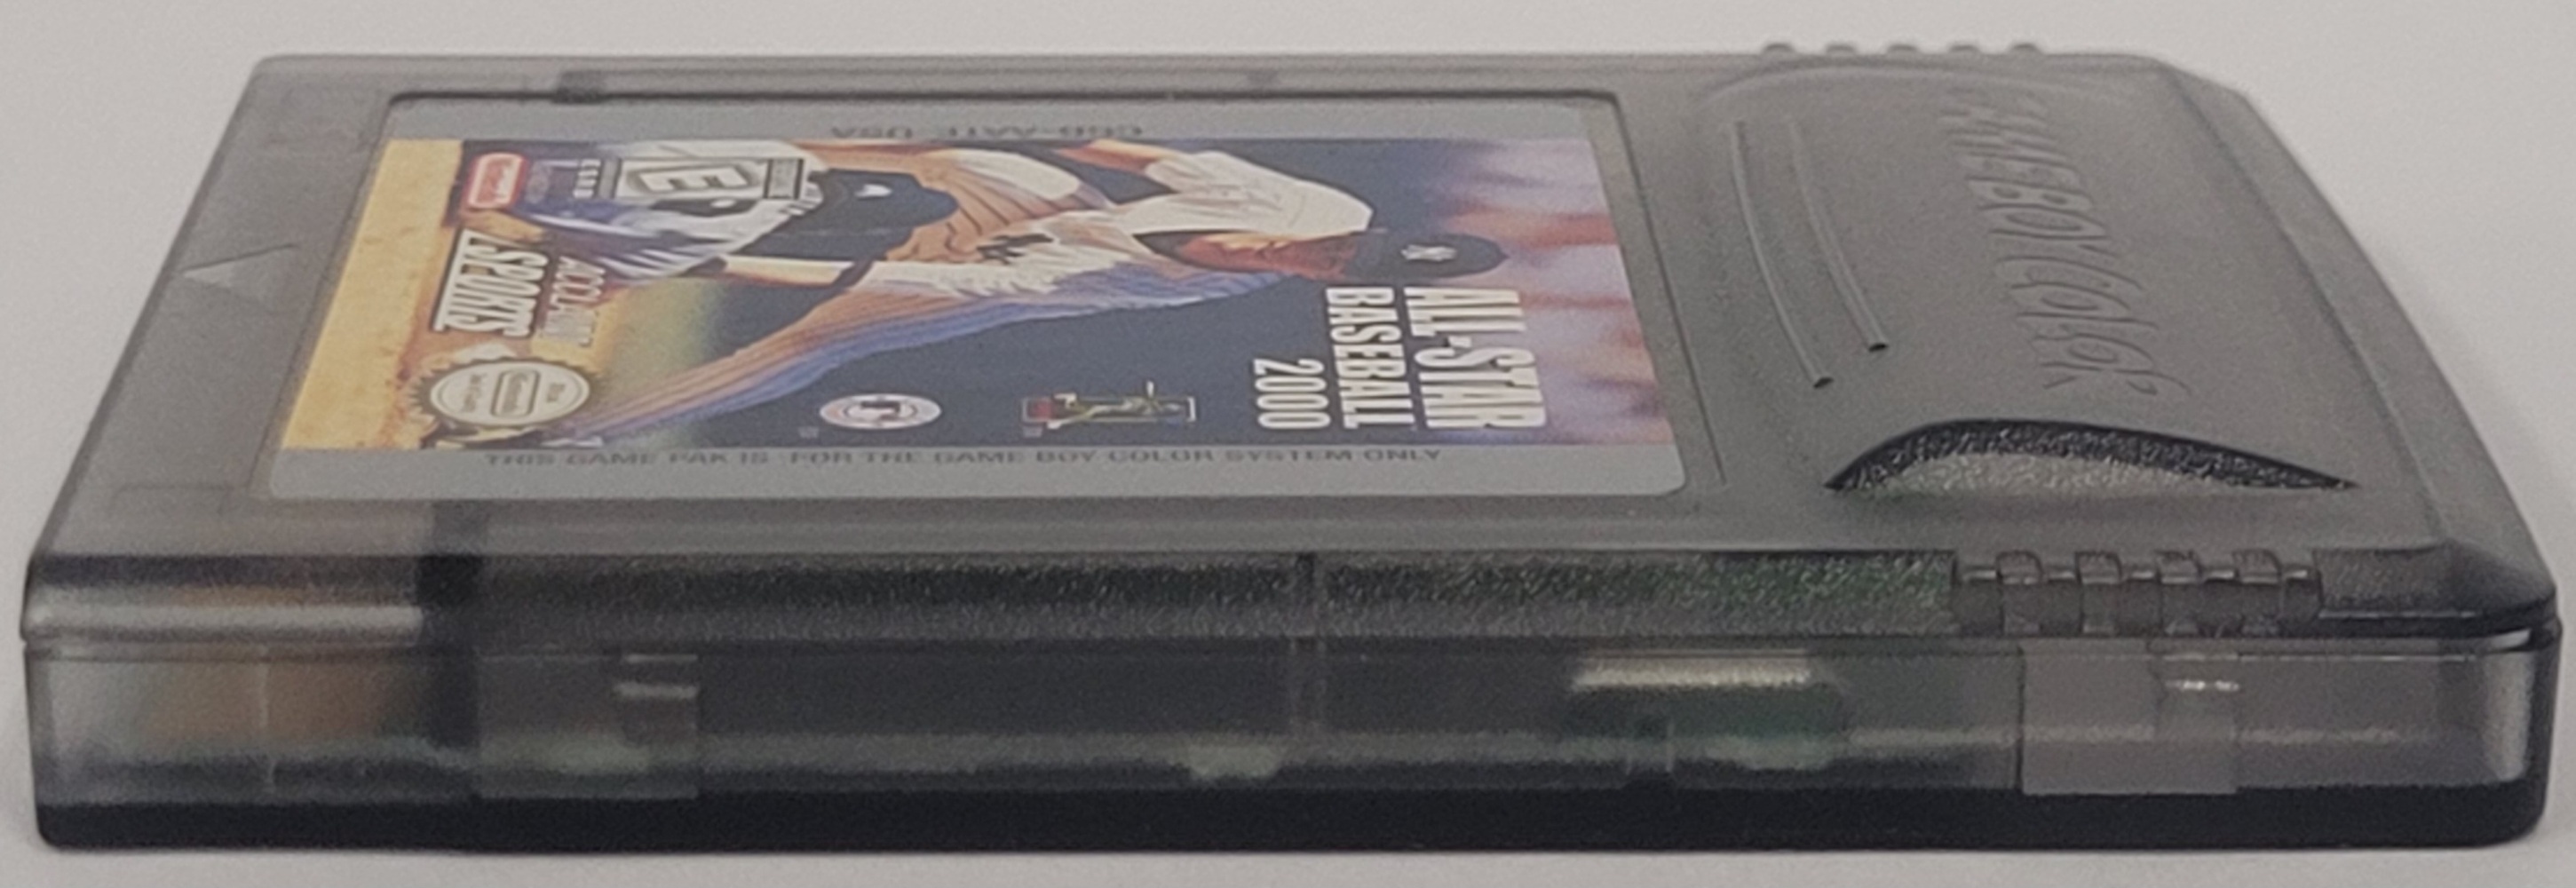 All-Star Baseball 2000 for Nintendo Gameboy Color GBC with Case 